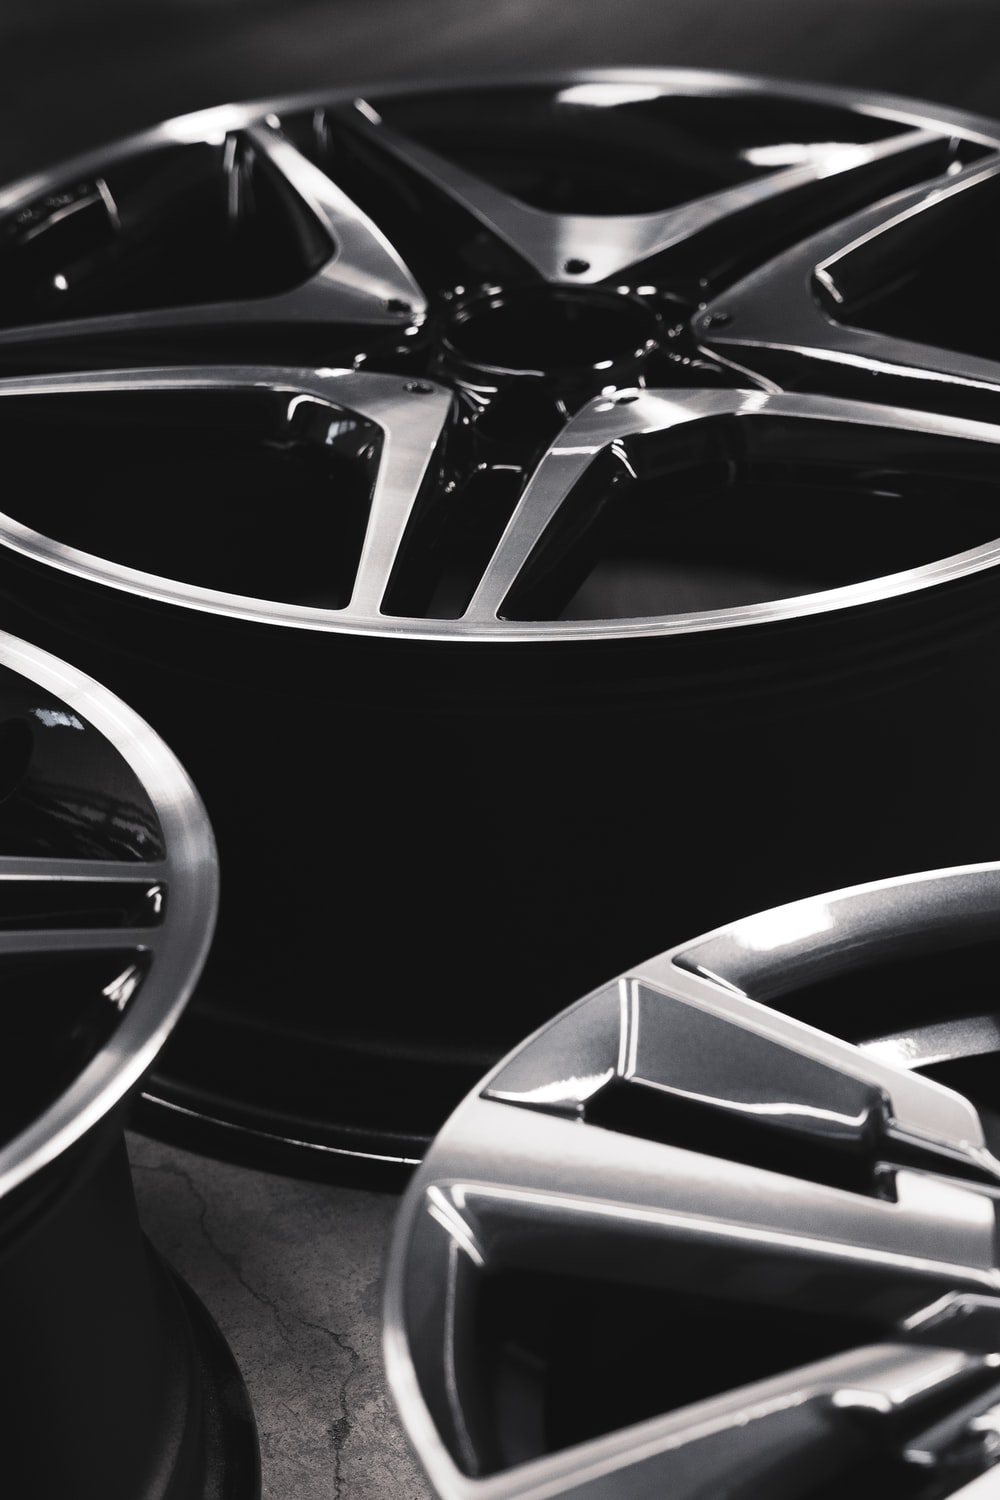 Alloy Wheel Picture. Download Free Image